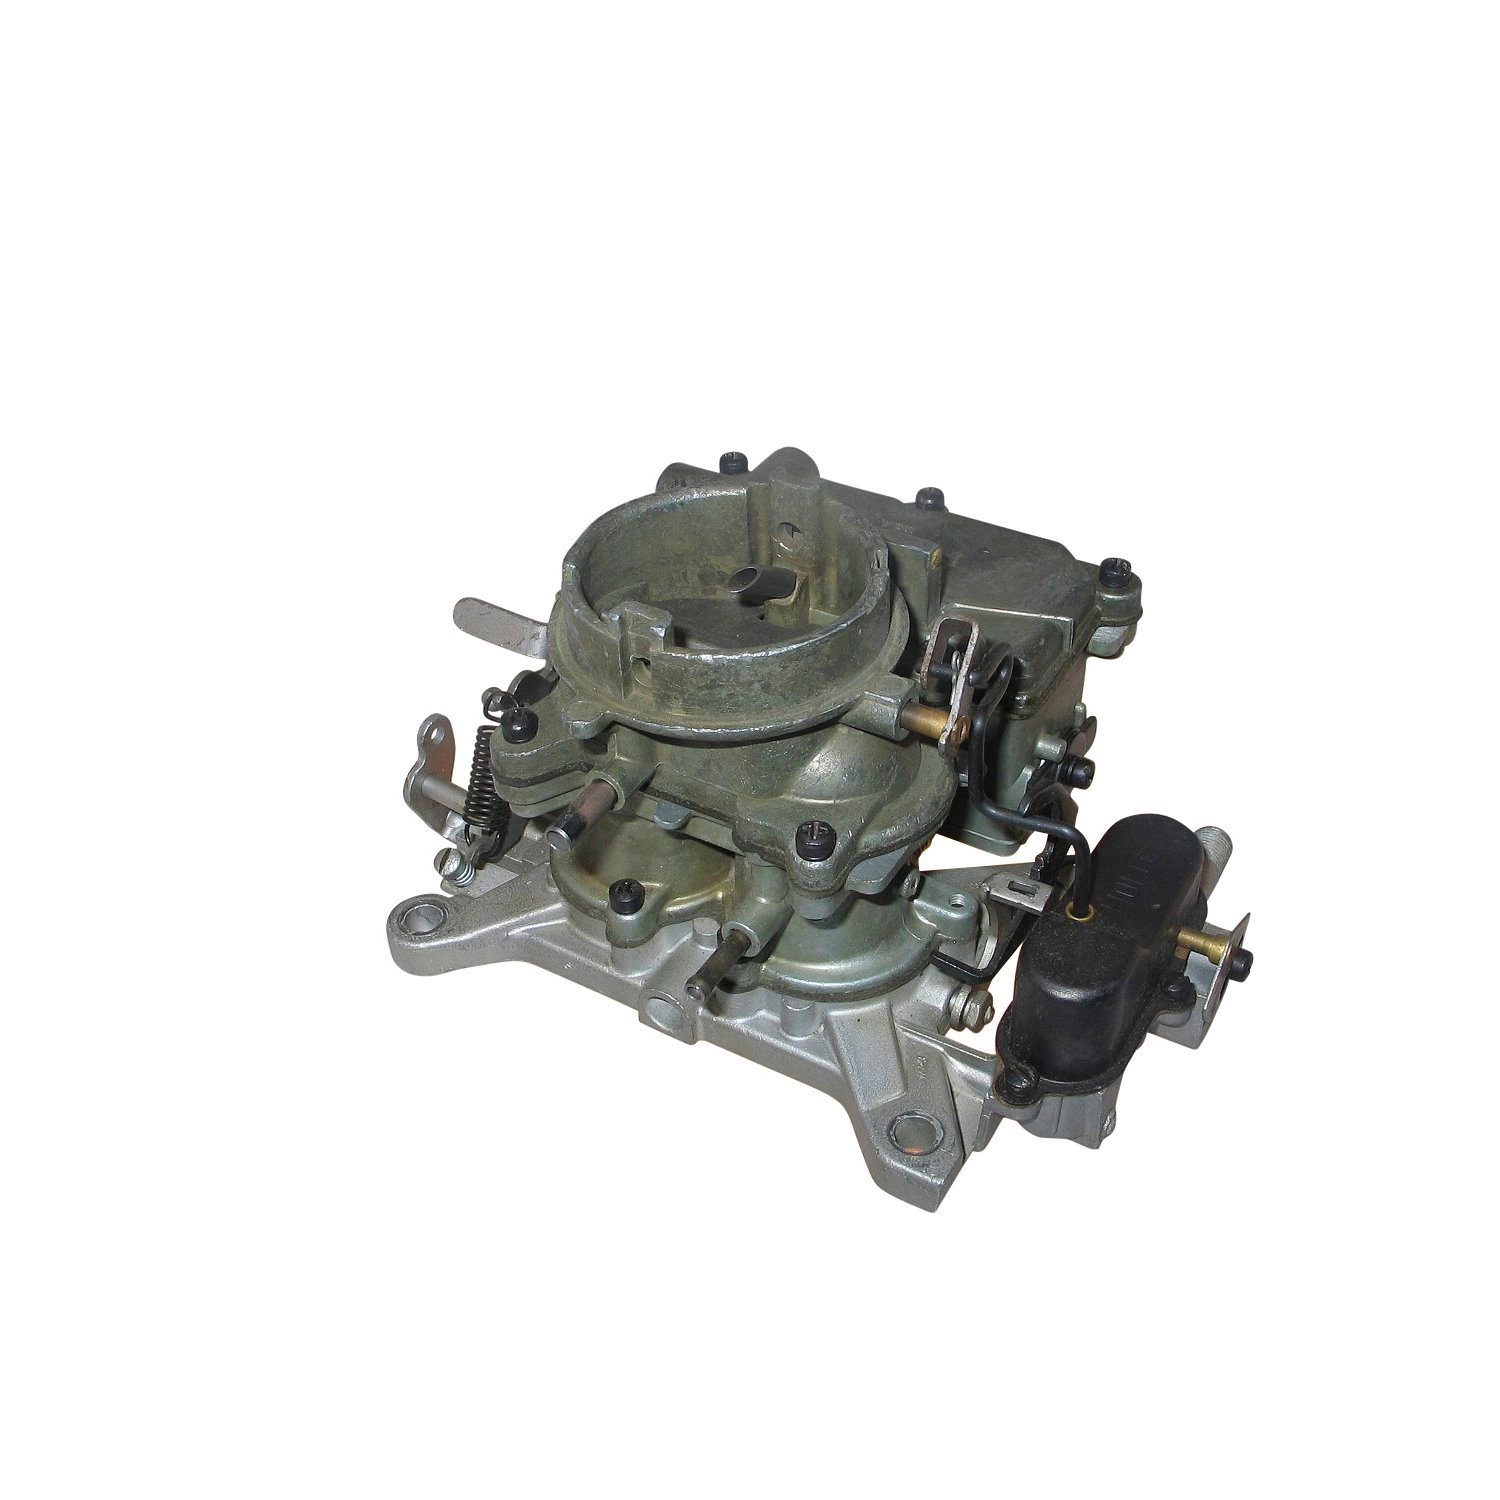 10-1050 Rochester Remanufactured Carburetor, 2209-Style